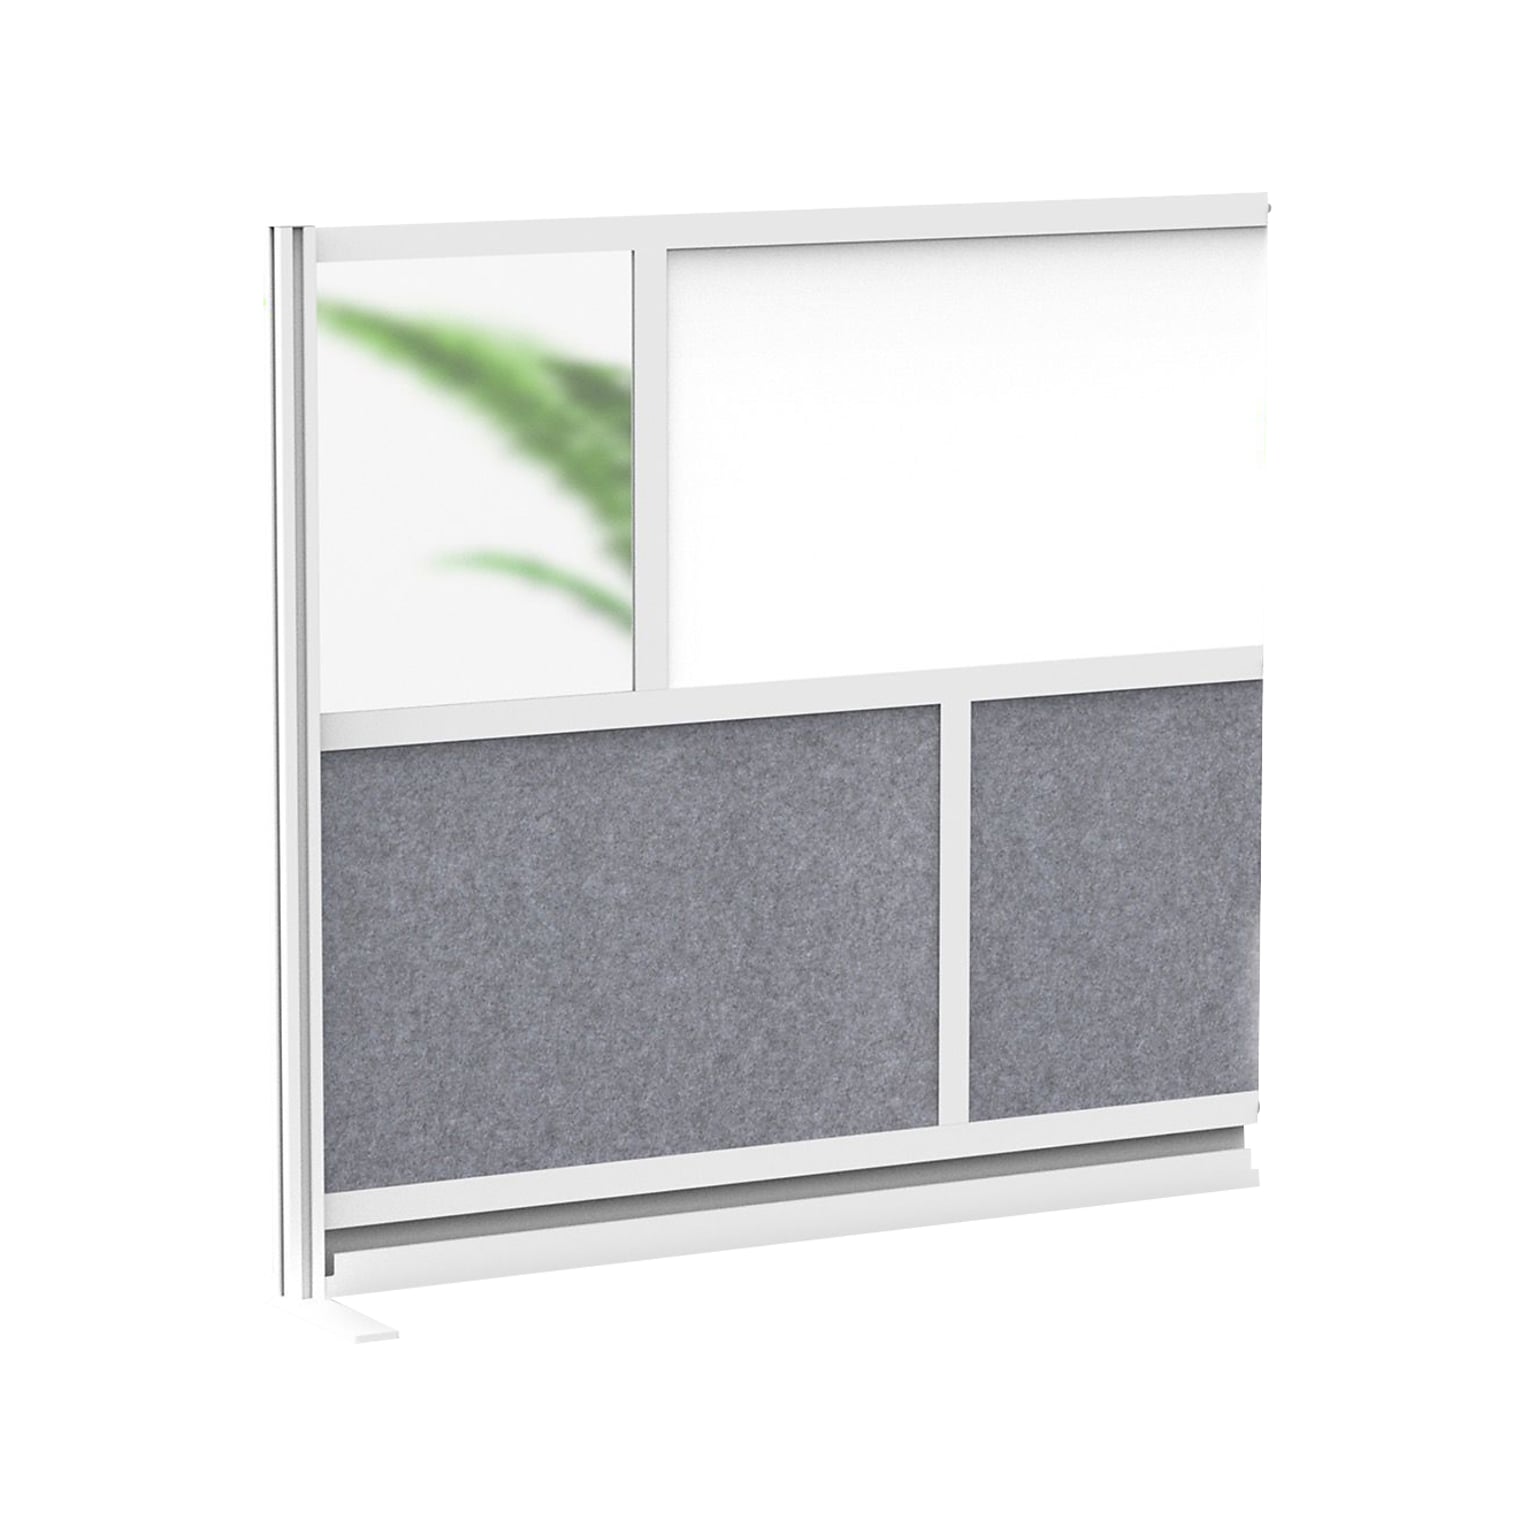 Luxor Workflow Series 4-Panel Modular Room Divider System Add-On Wall with Whiteboard, 48H x 53W, Gray/Silver